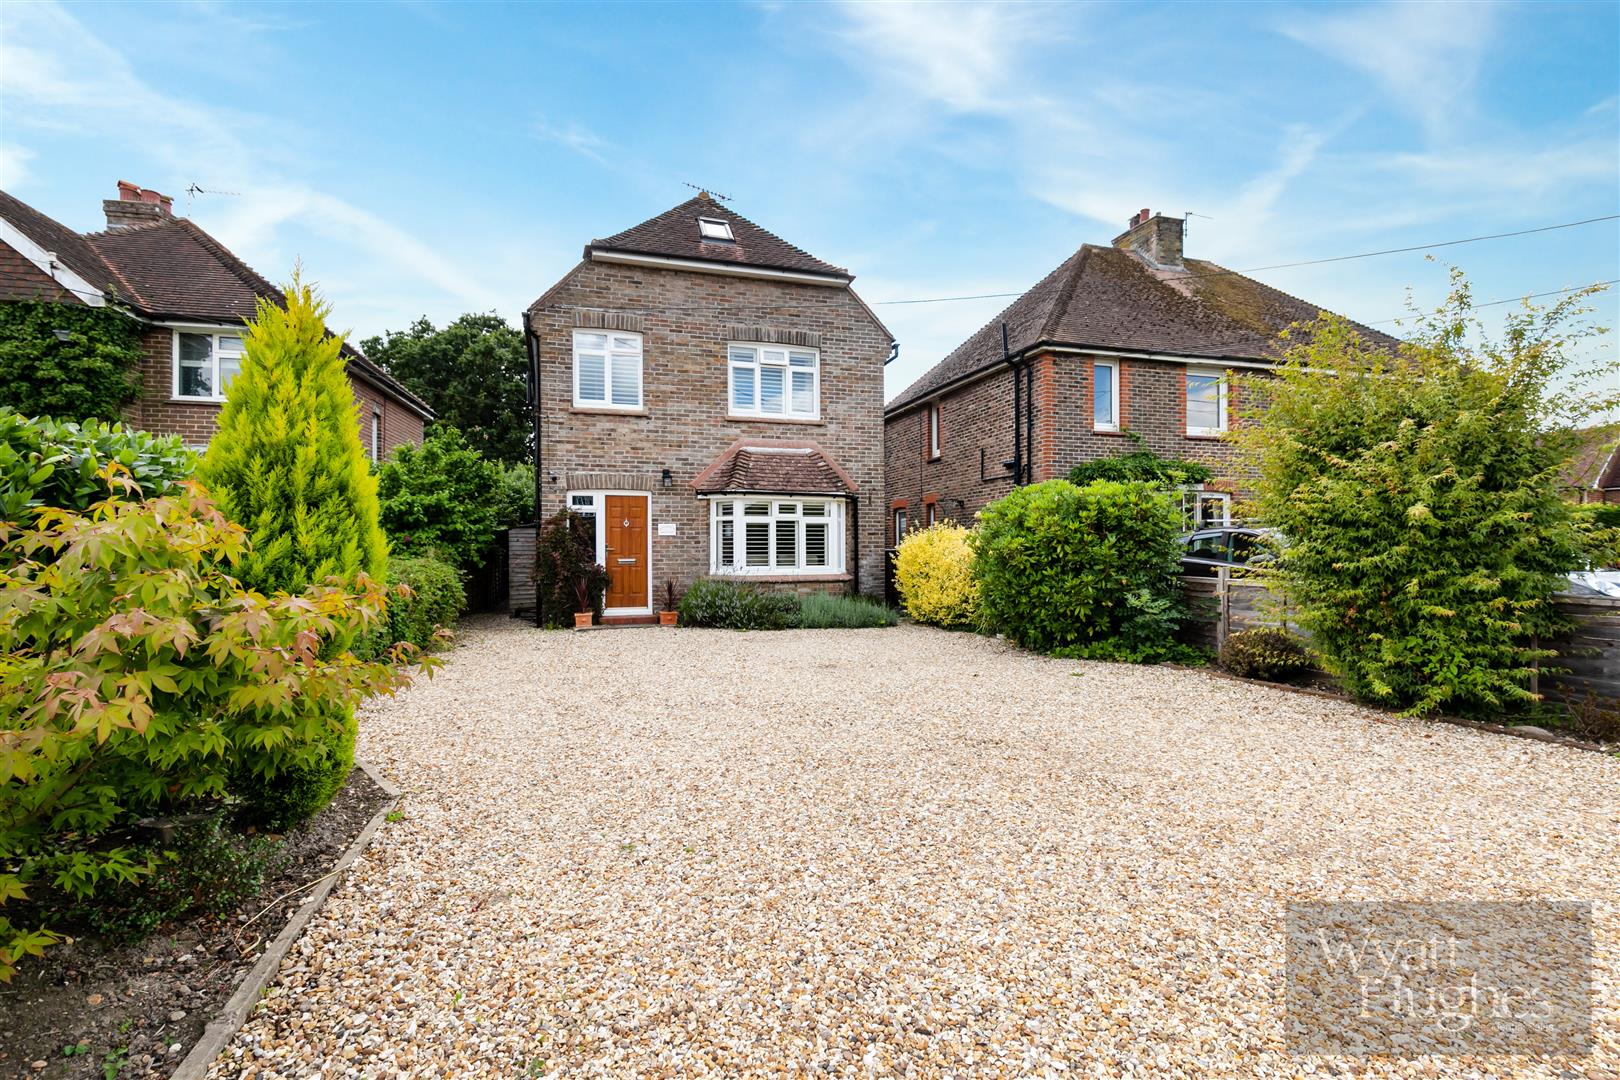 3 bed detached house for sale in The Green, Ninfield  - Property Image 1